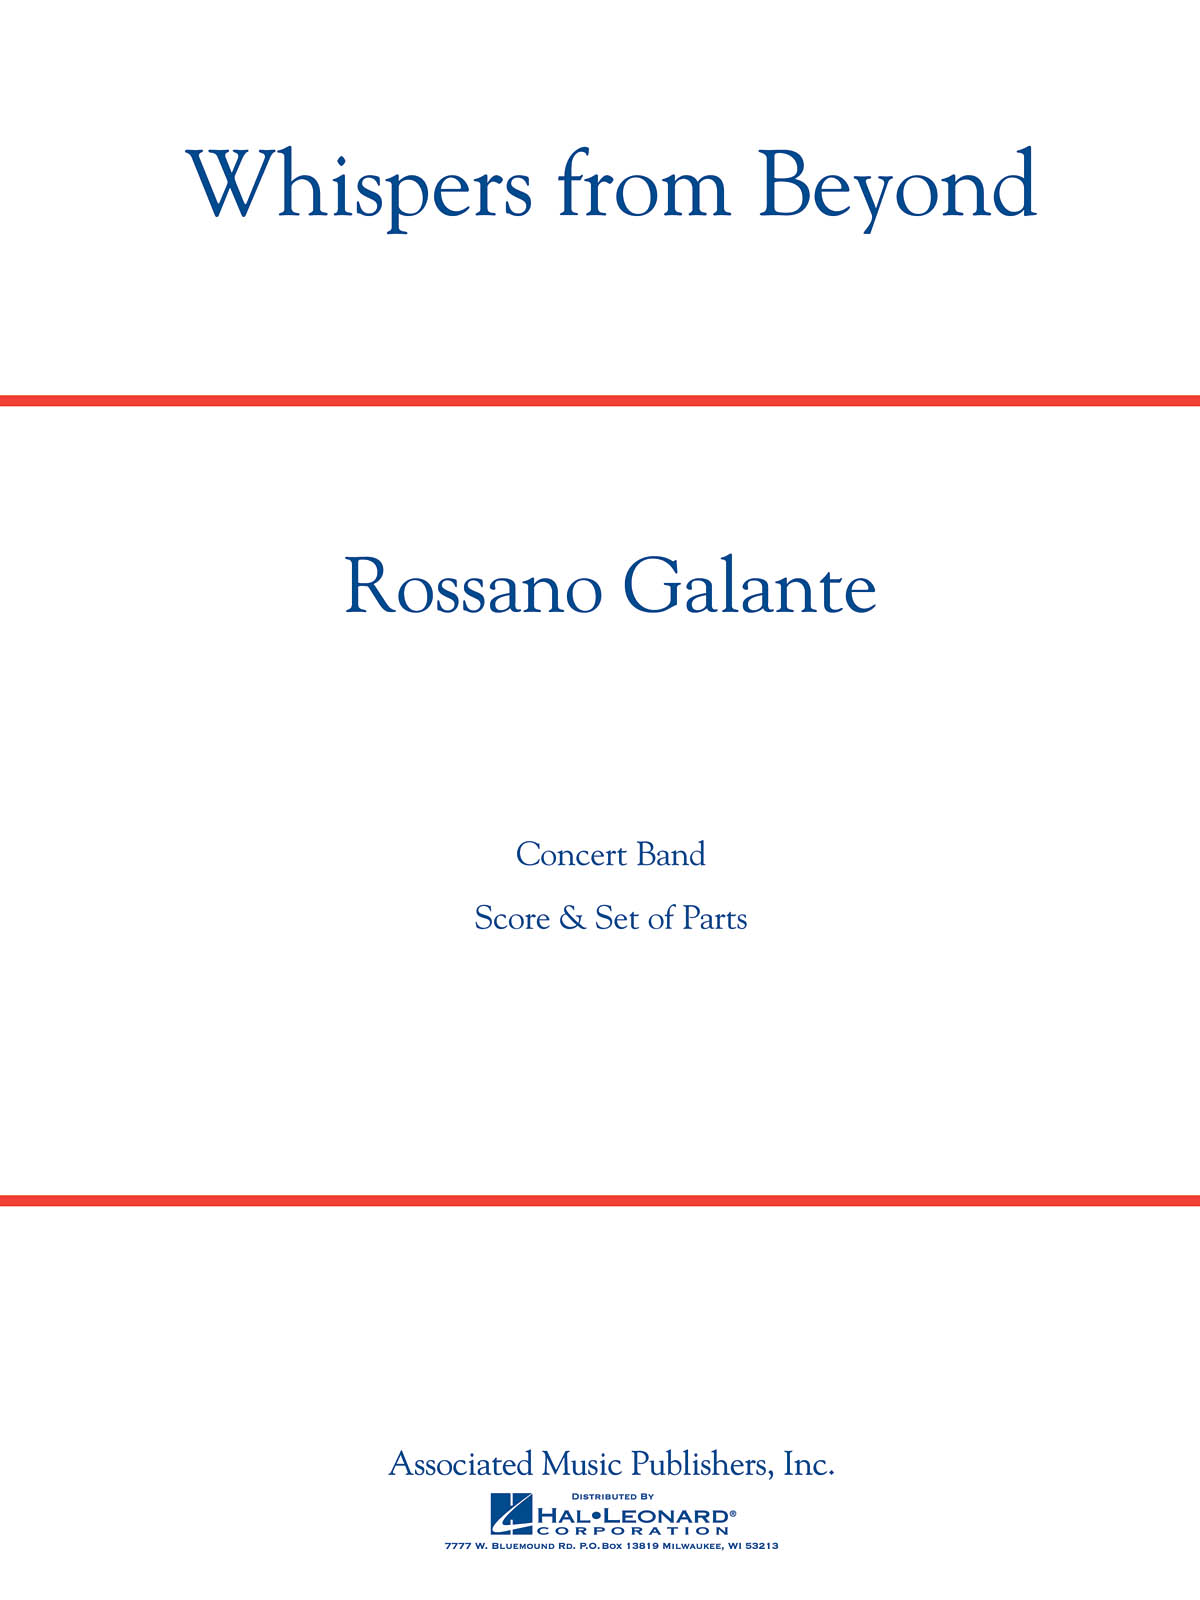 Rossano Galante: Whispers from Beyond: Concert Band